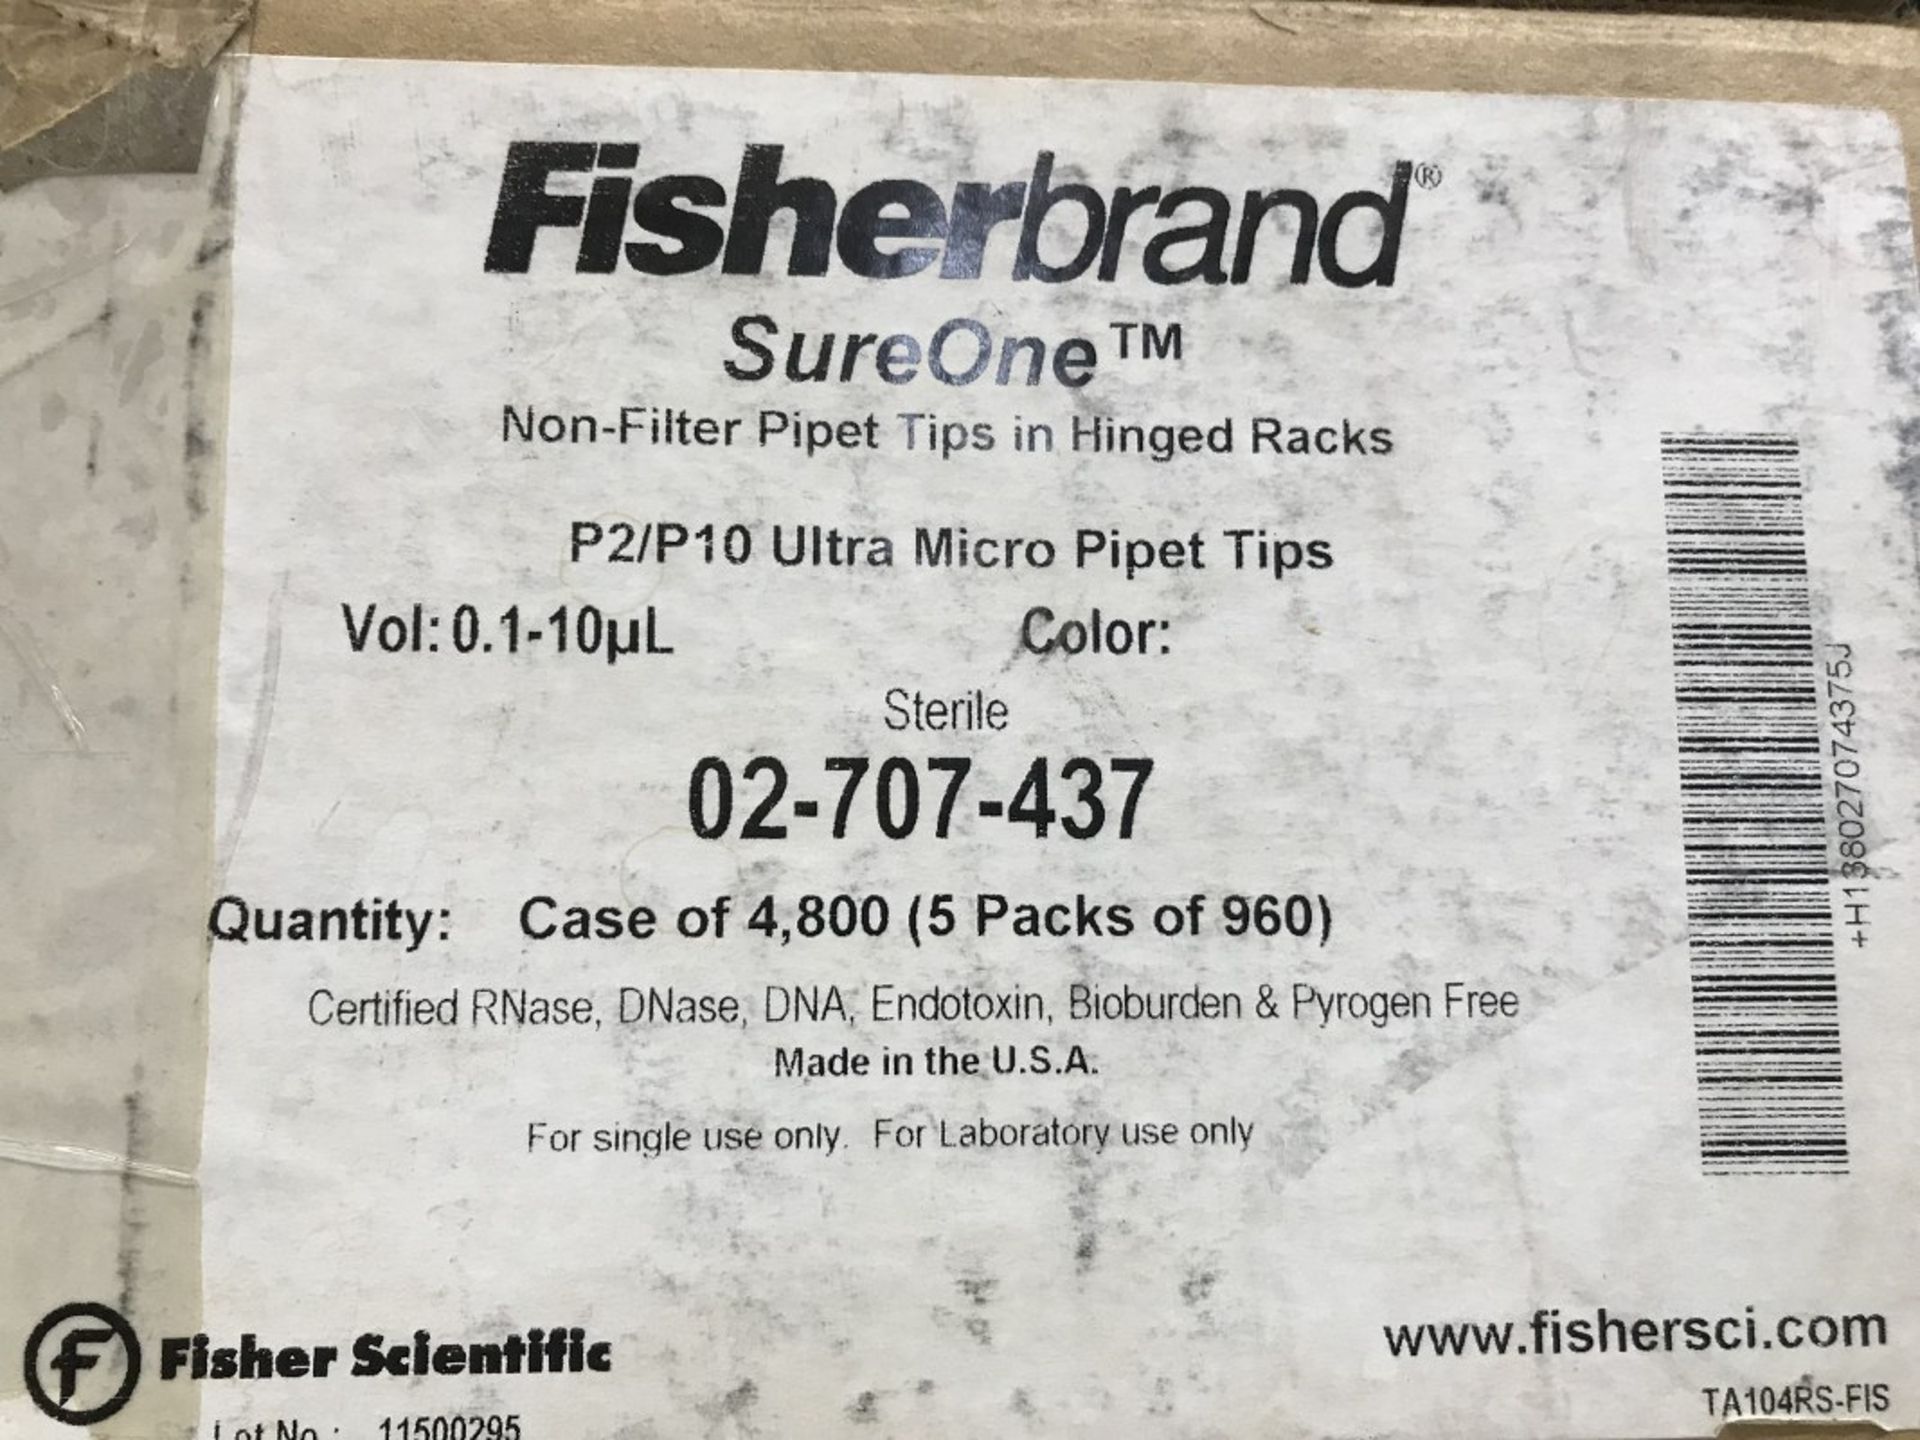 LOT OF: FISHERBRAND SUREONE - P2/P10 ULTRA MICRO PIPET TIPS - 2 BOXES 95 UNITS/BOX) - Image 2 of 2